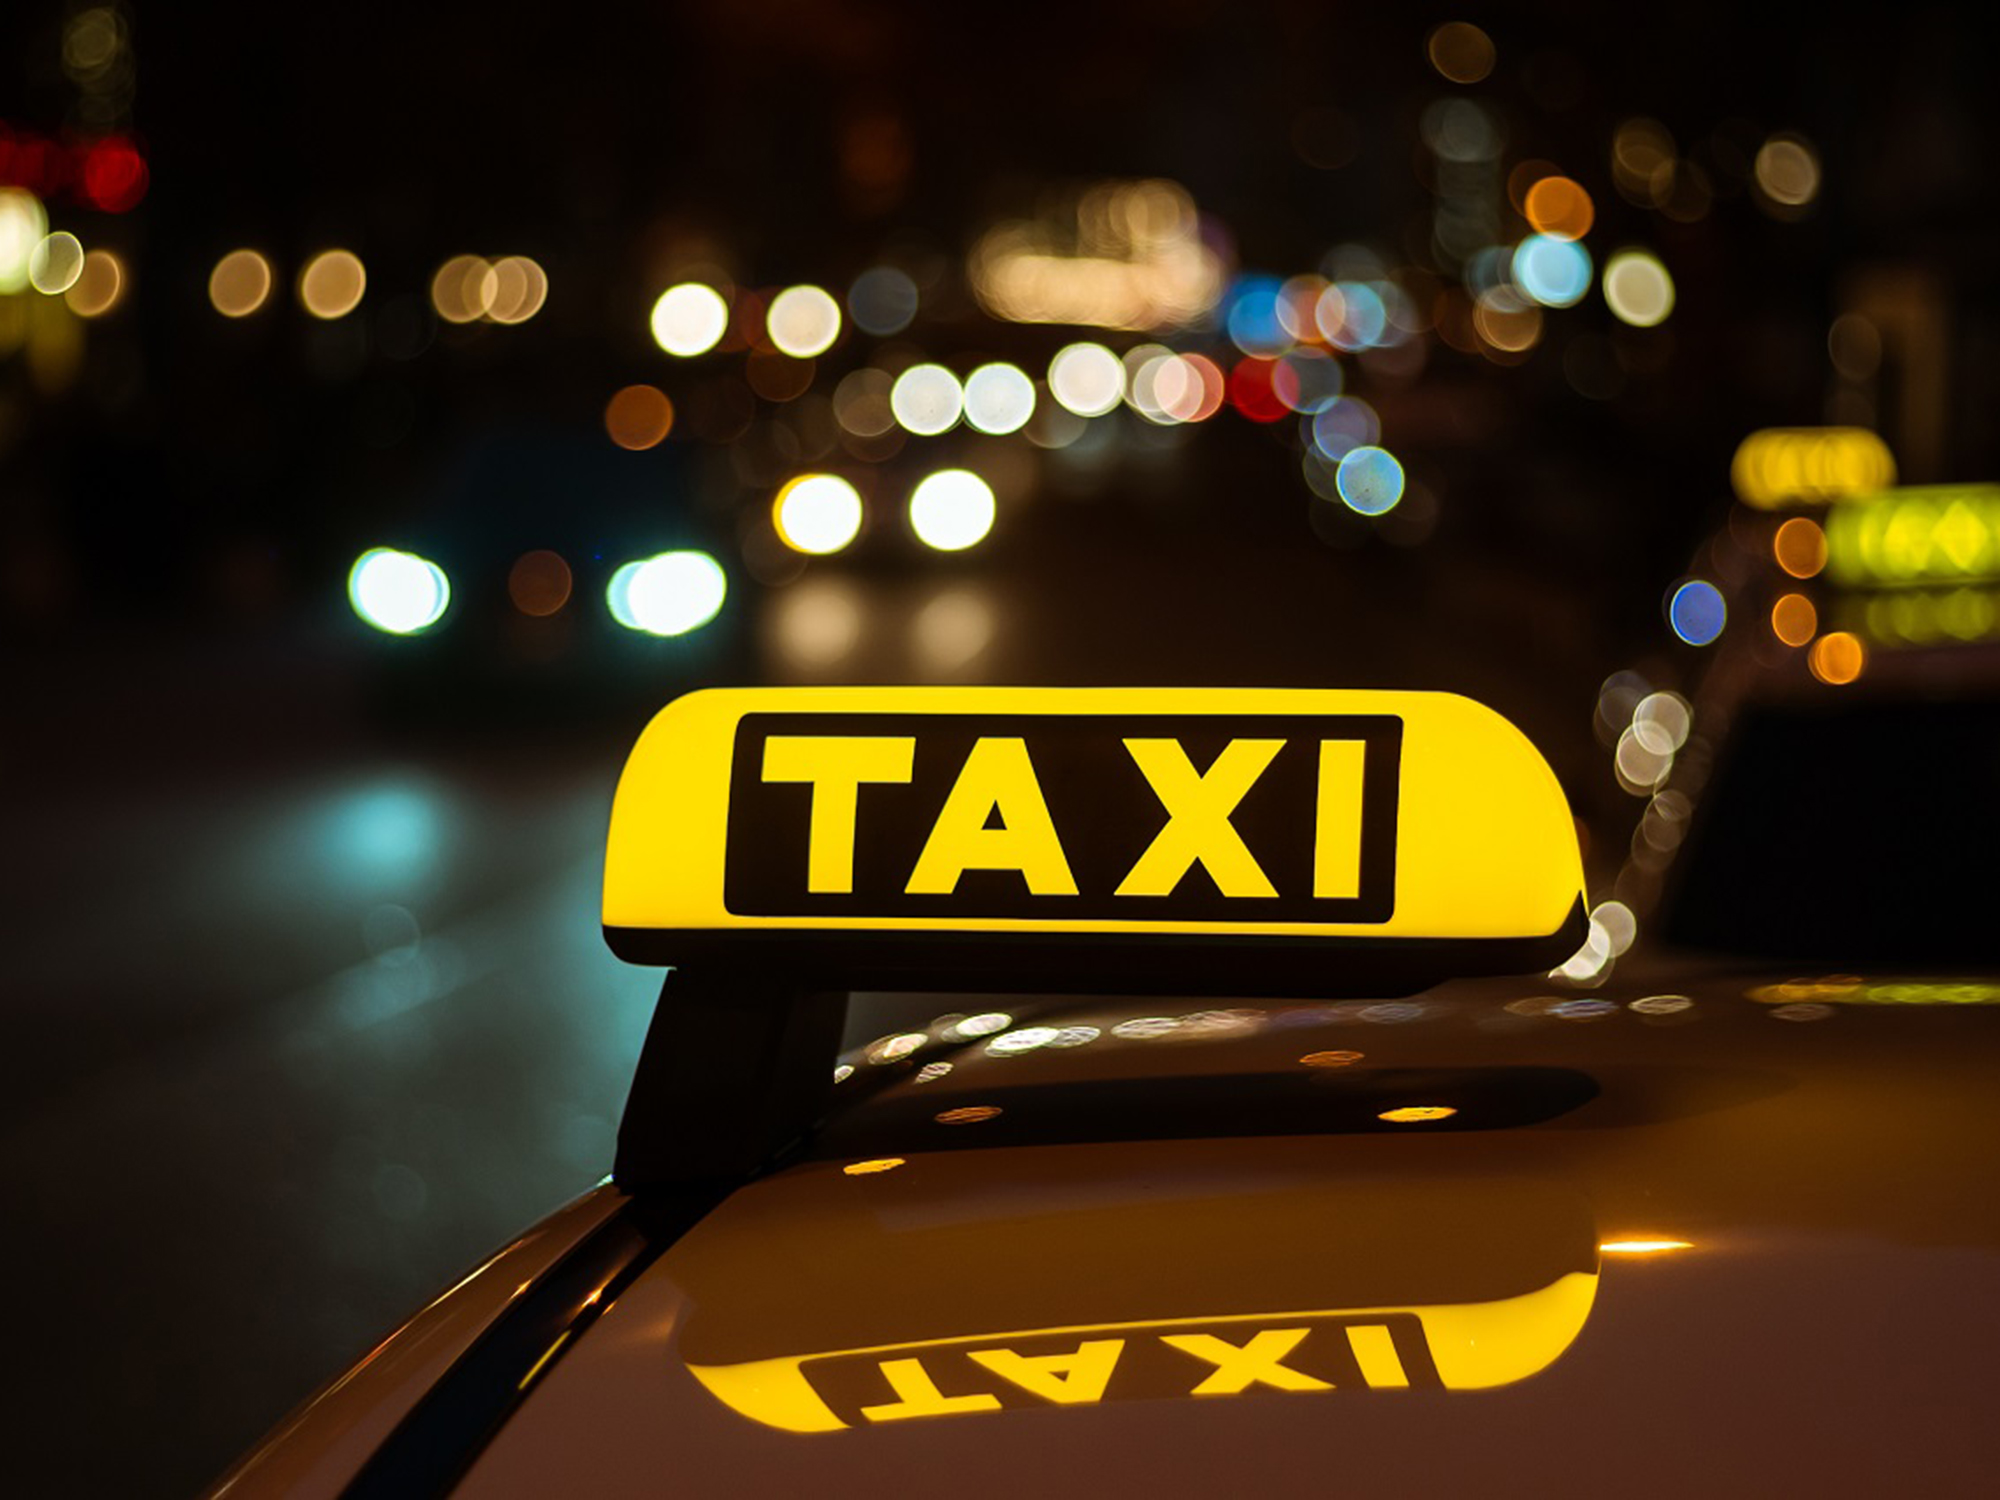 Things Not to Do in Europe - Avoid Taxis at Late Night